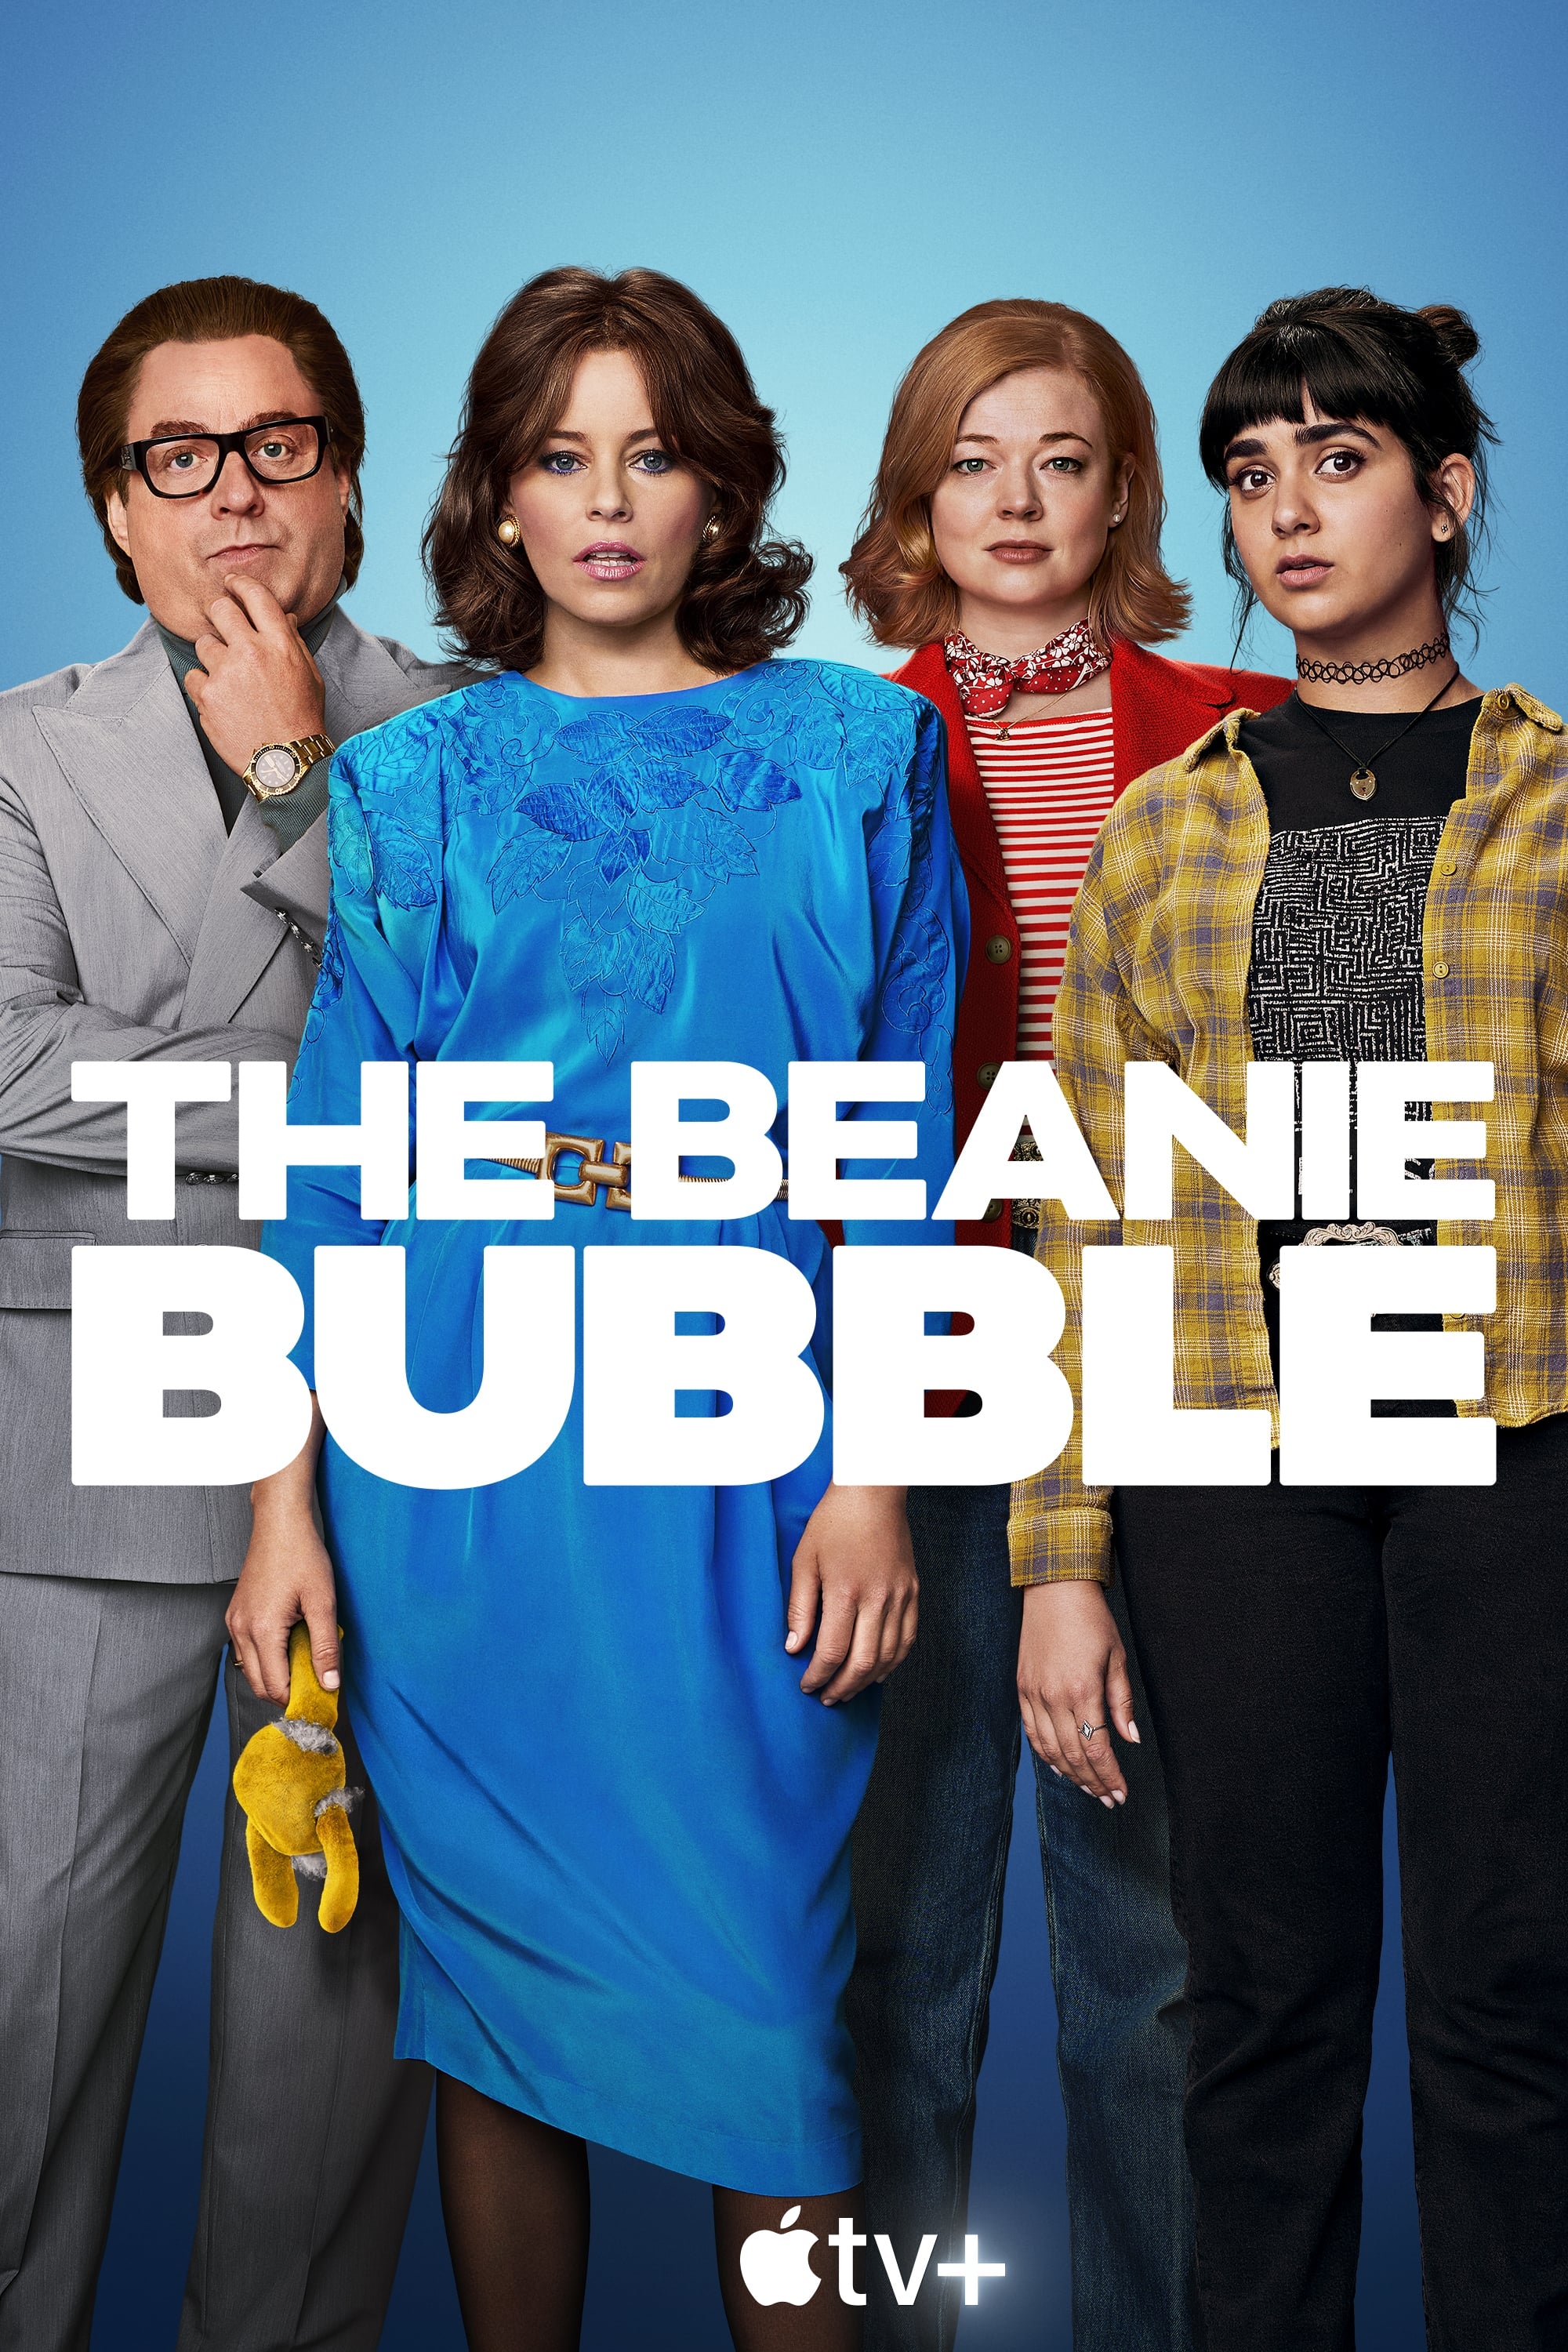 [WATCH 46+] The Beanie Bubble (2023) FULL MOVIE ONLINE FREE ENGLISH/Dub/SUB Comedy STREAMINGS ������ Movie Poster